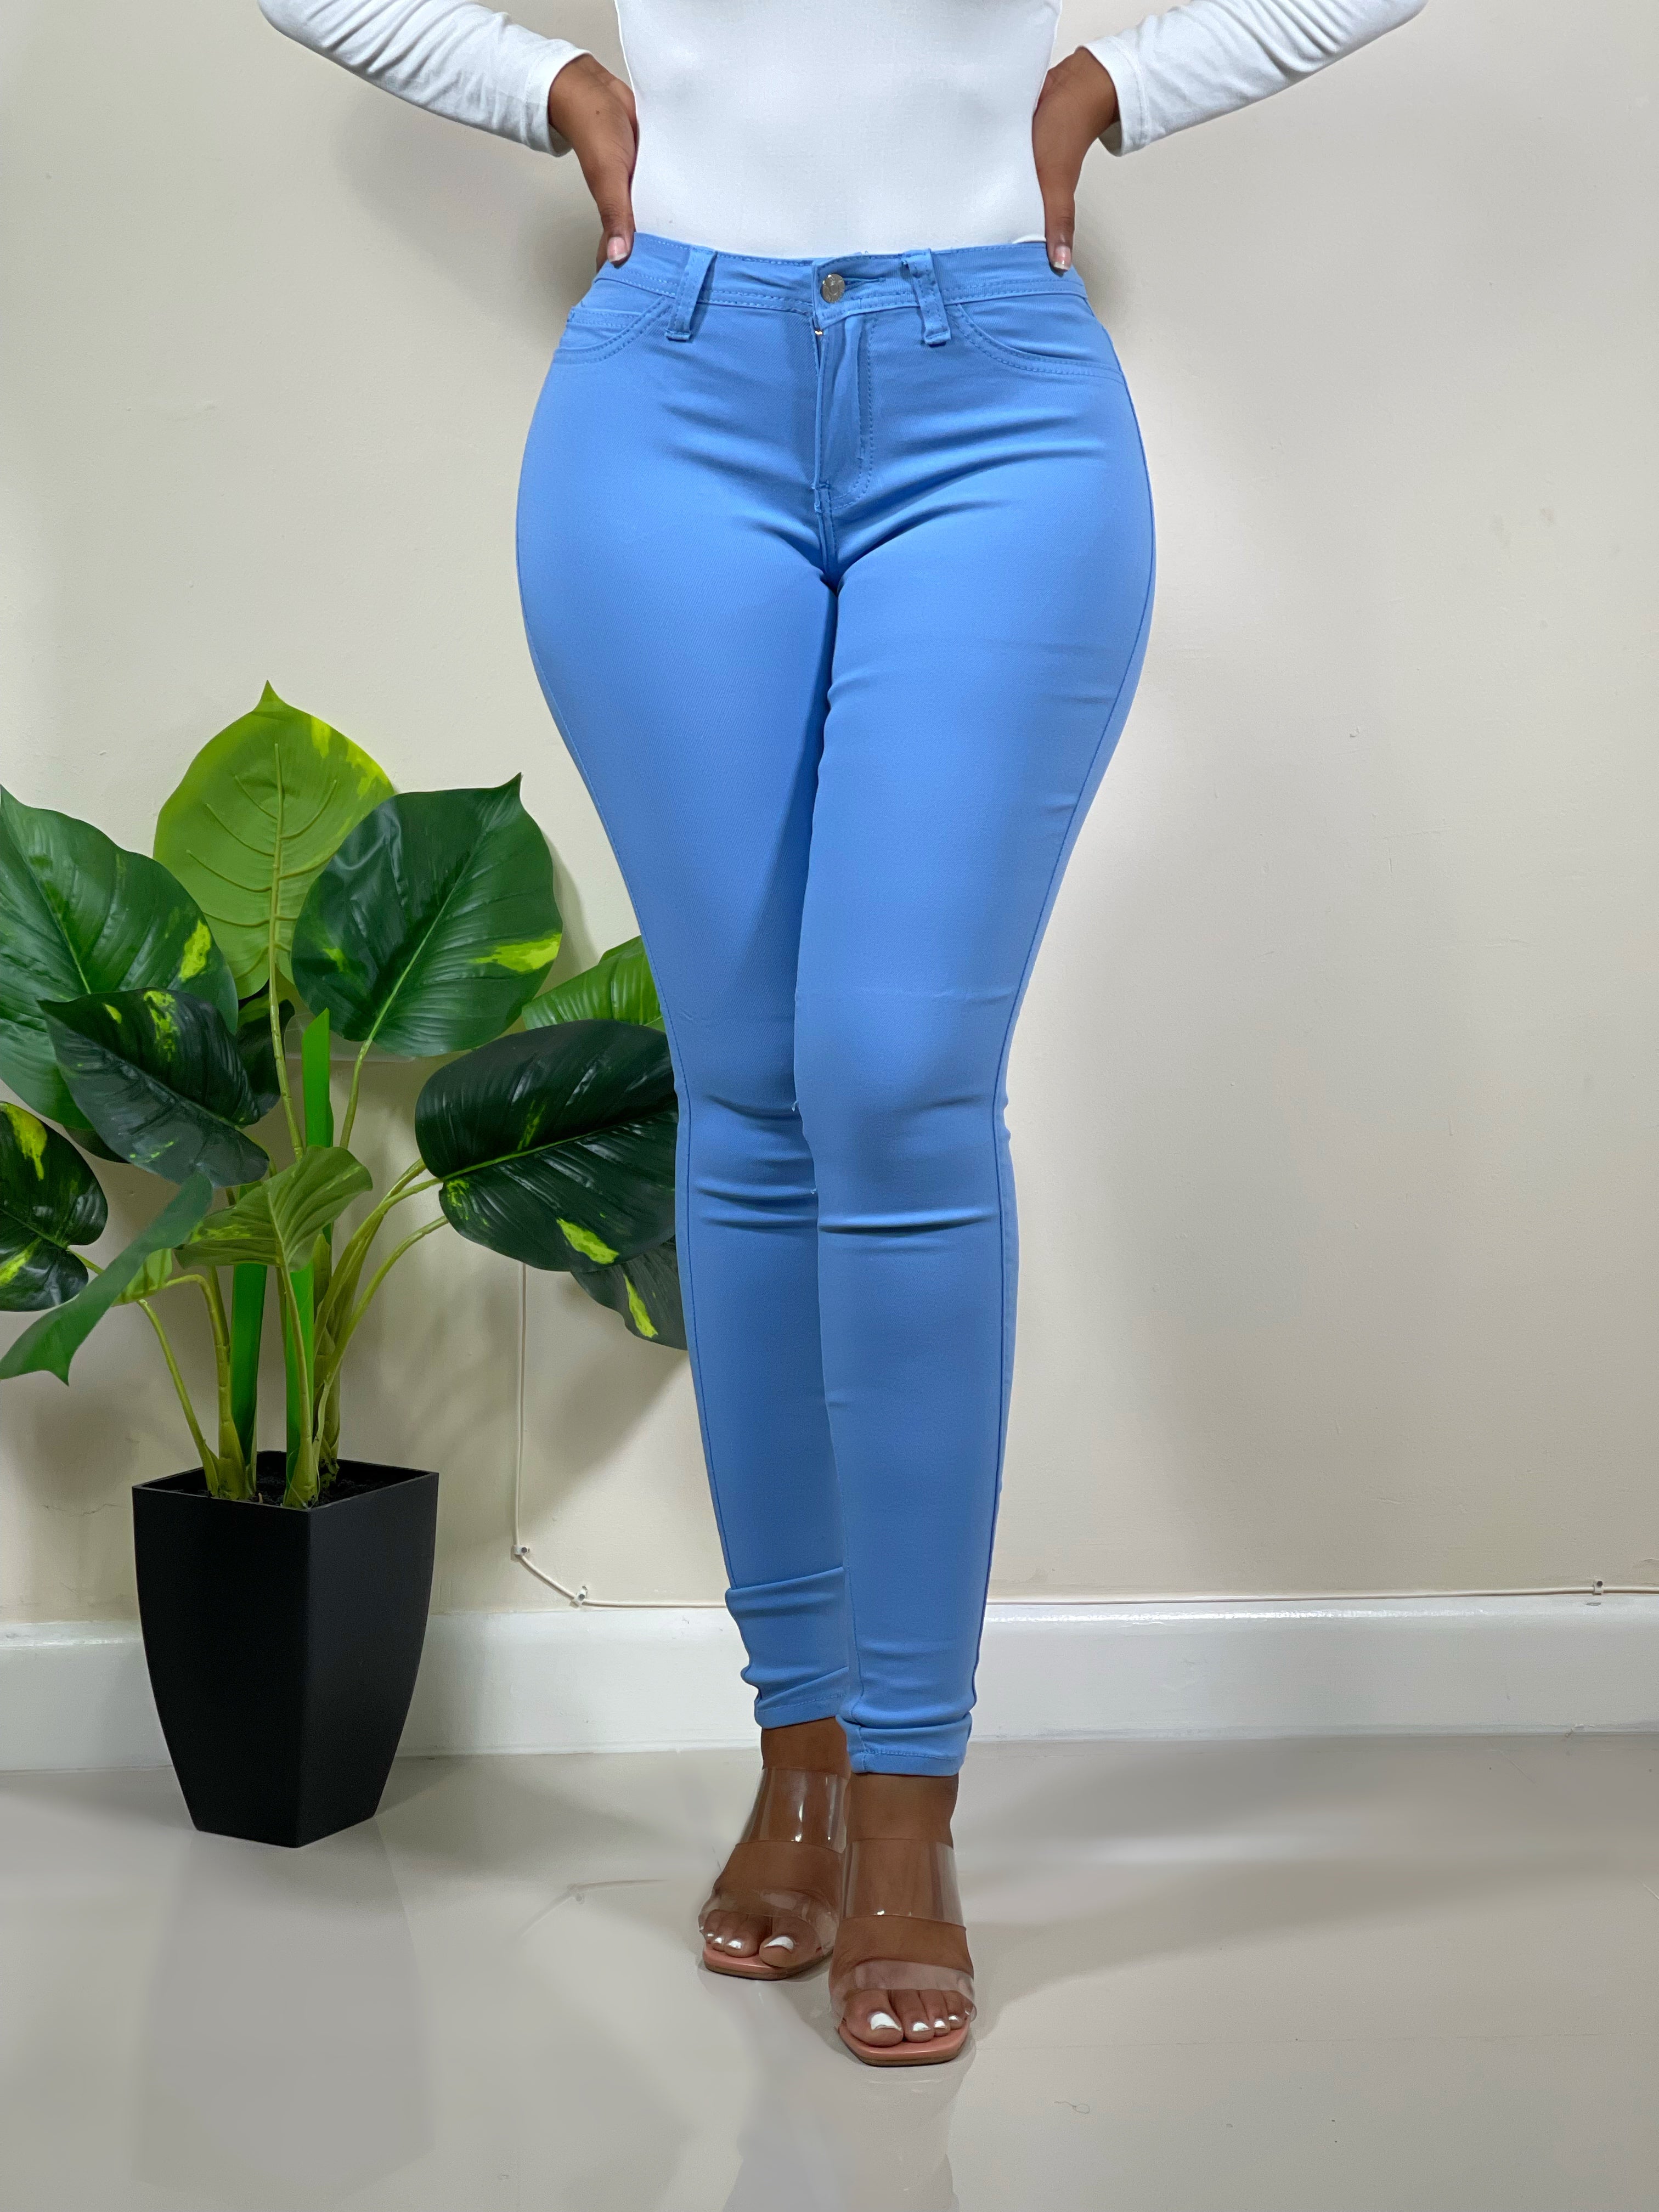 Gasto Educación moral aeronave Classic Girl High Rise Skinny Jeans-Sky Blue | Impoze Style™